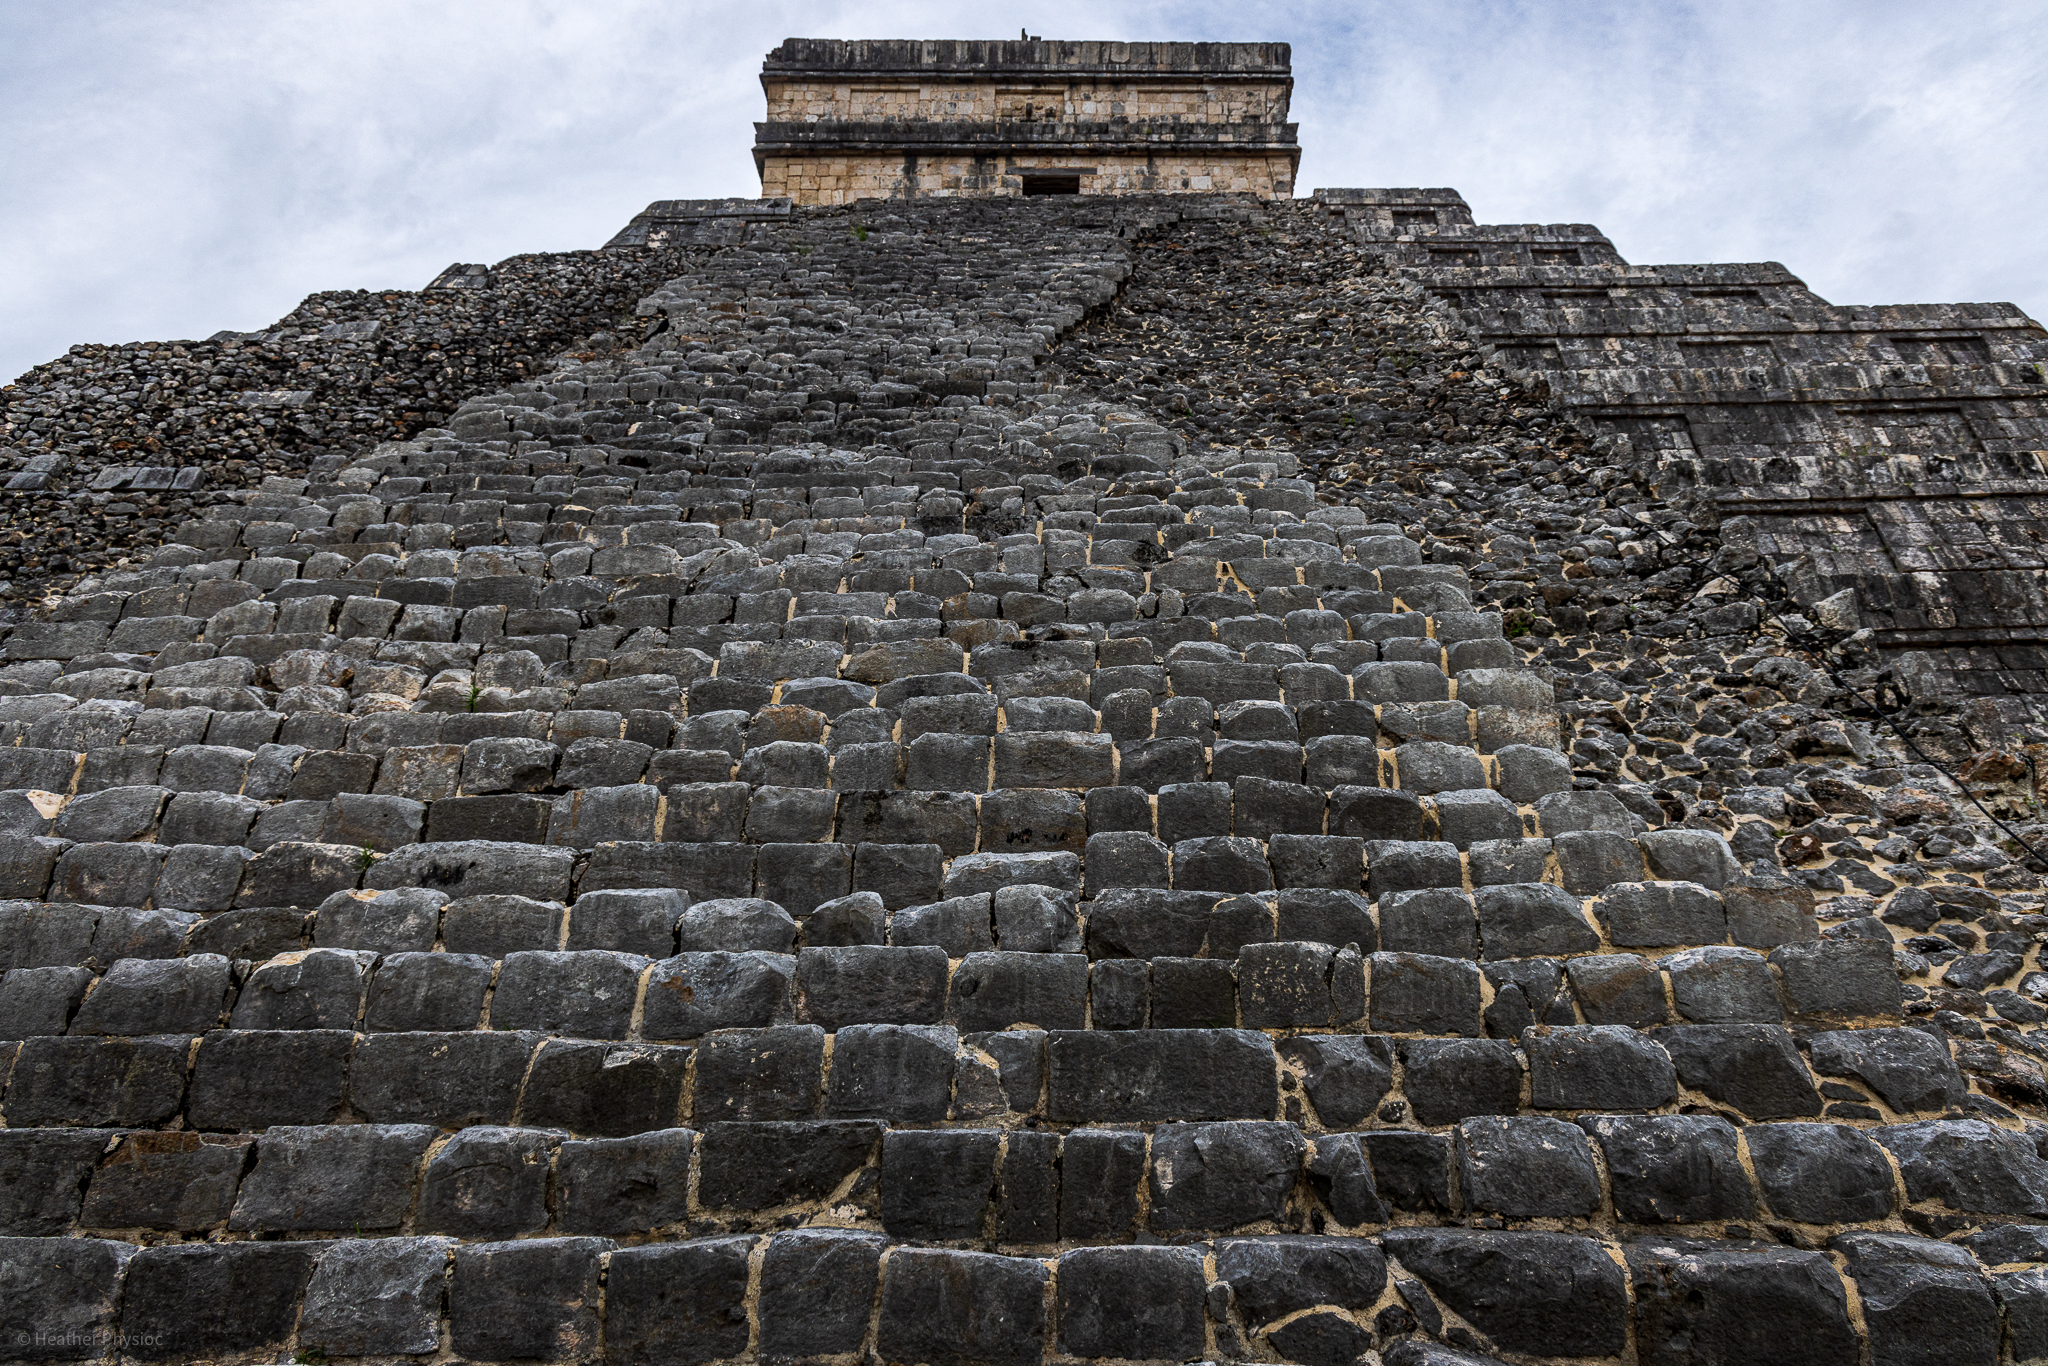 Upward view of the steep stairway of the Kukulkan Pyramid at Chichen Itza, showcasing the massive stone blocks and rugged texture, with the temple's peak looming against a cloudy sky.